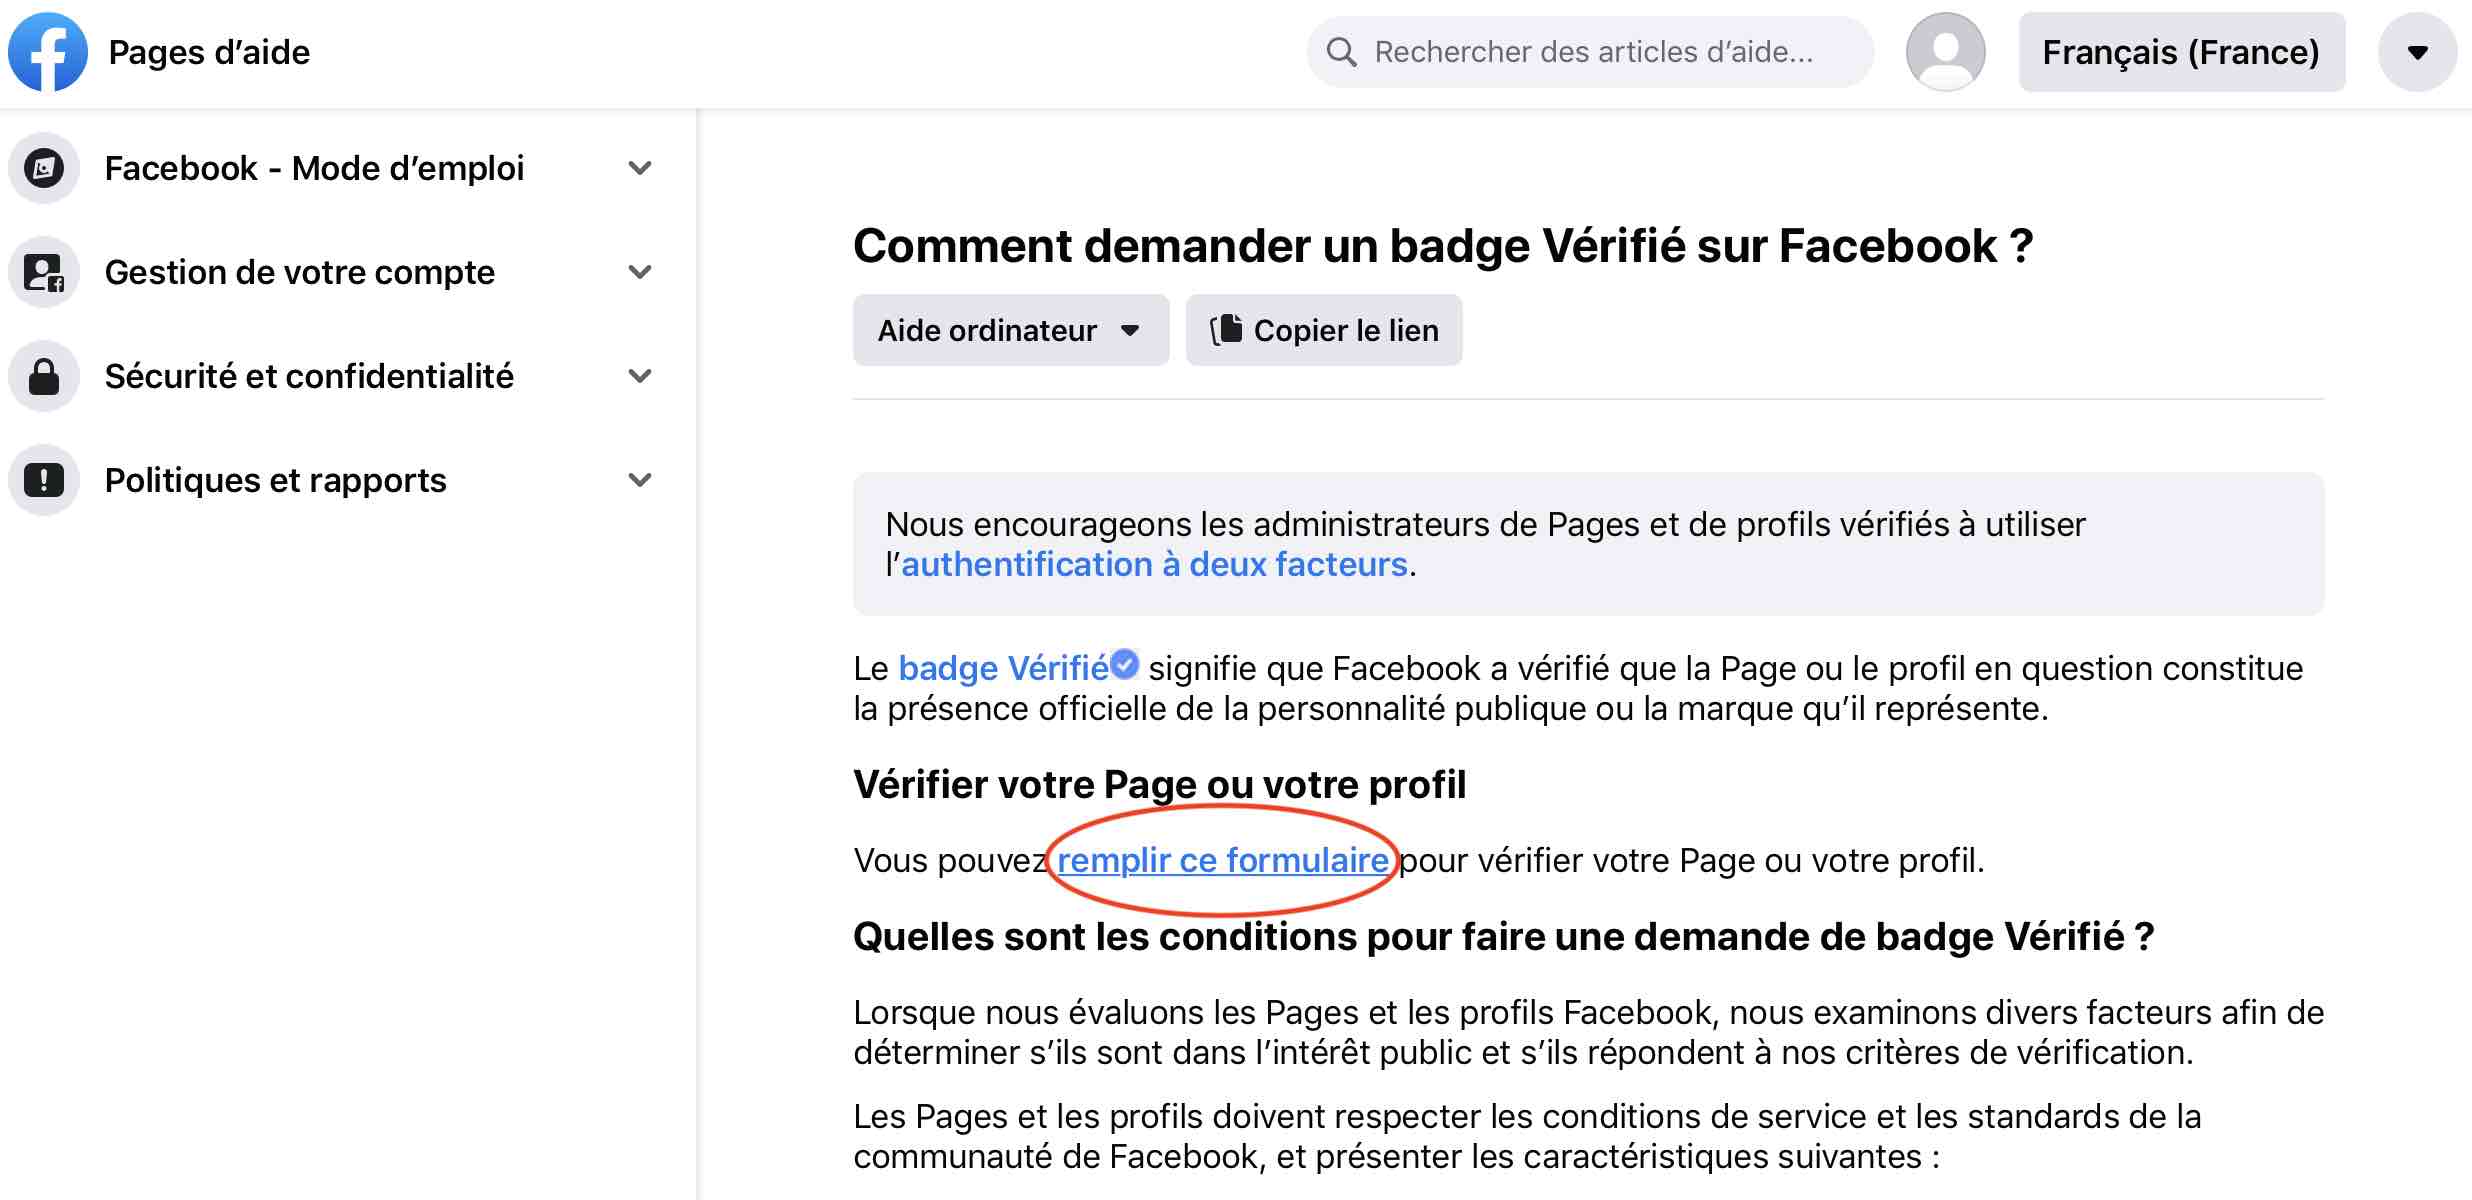 page d'aide certification Facebook